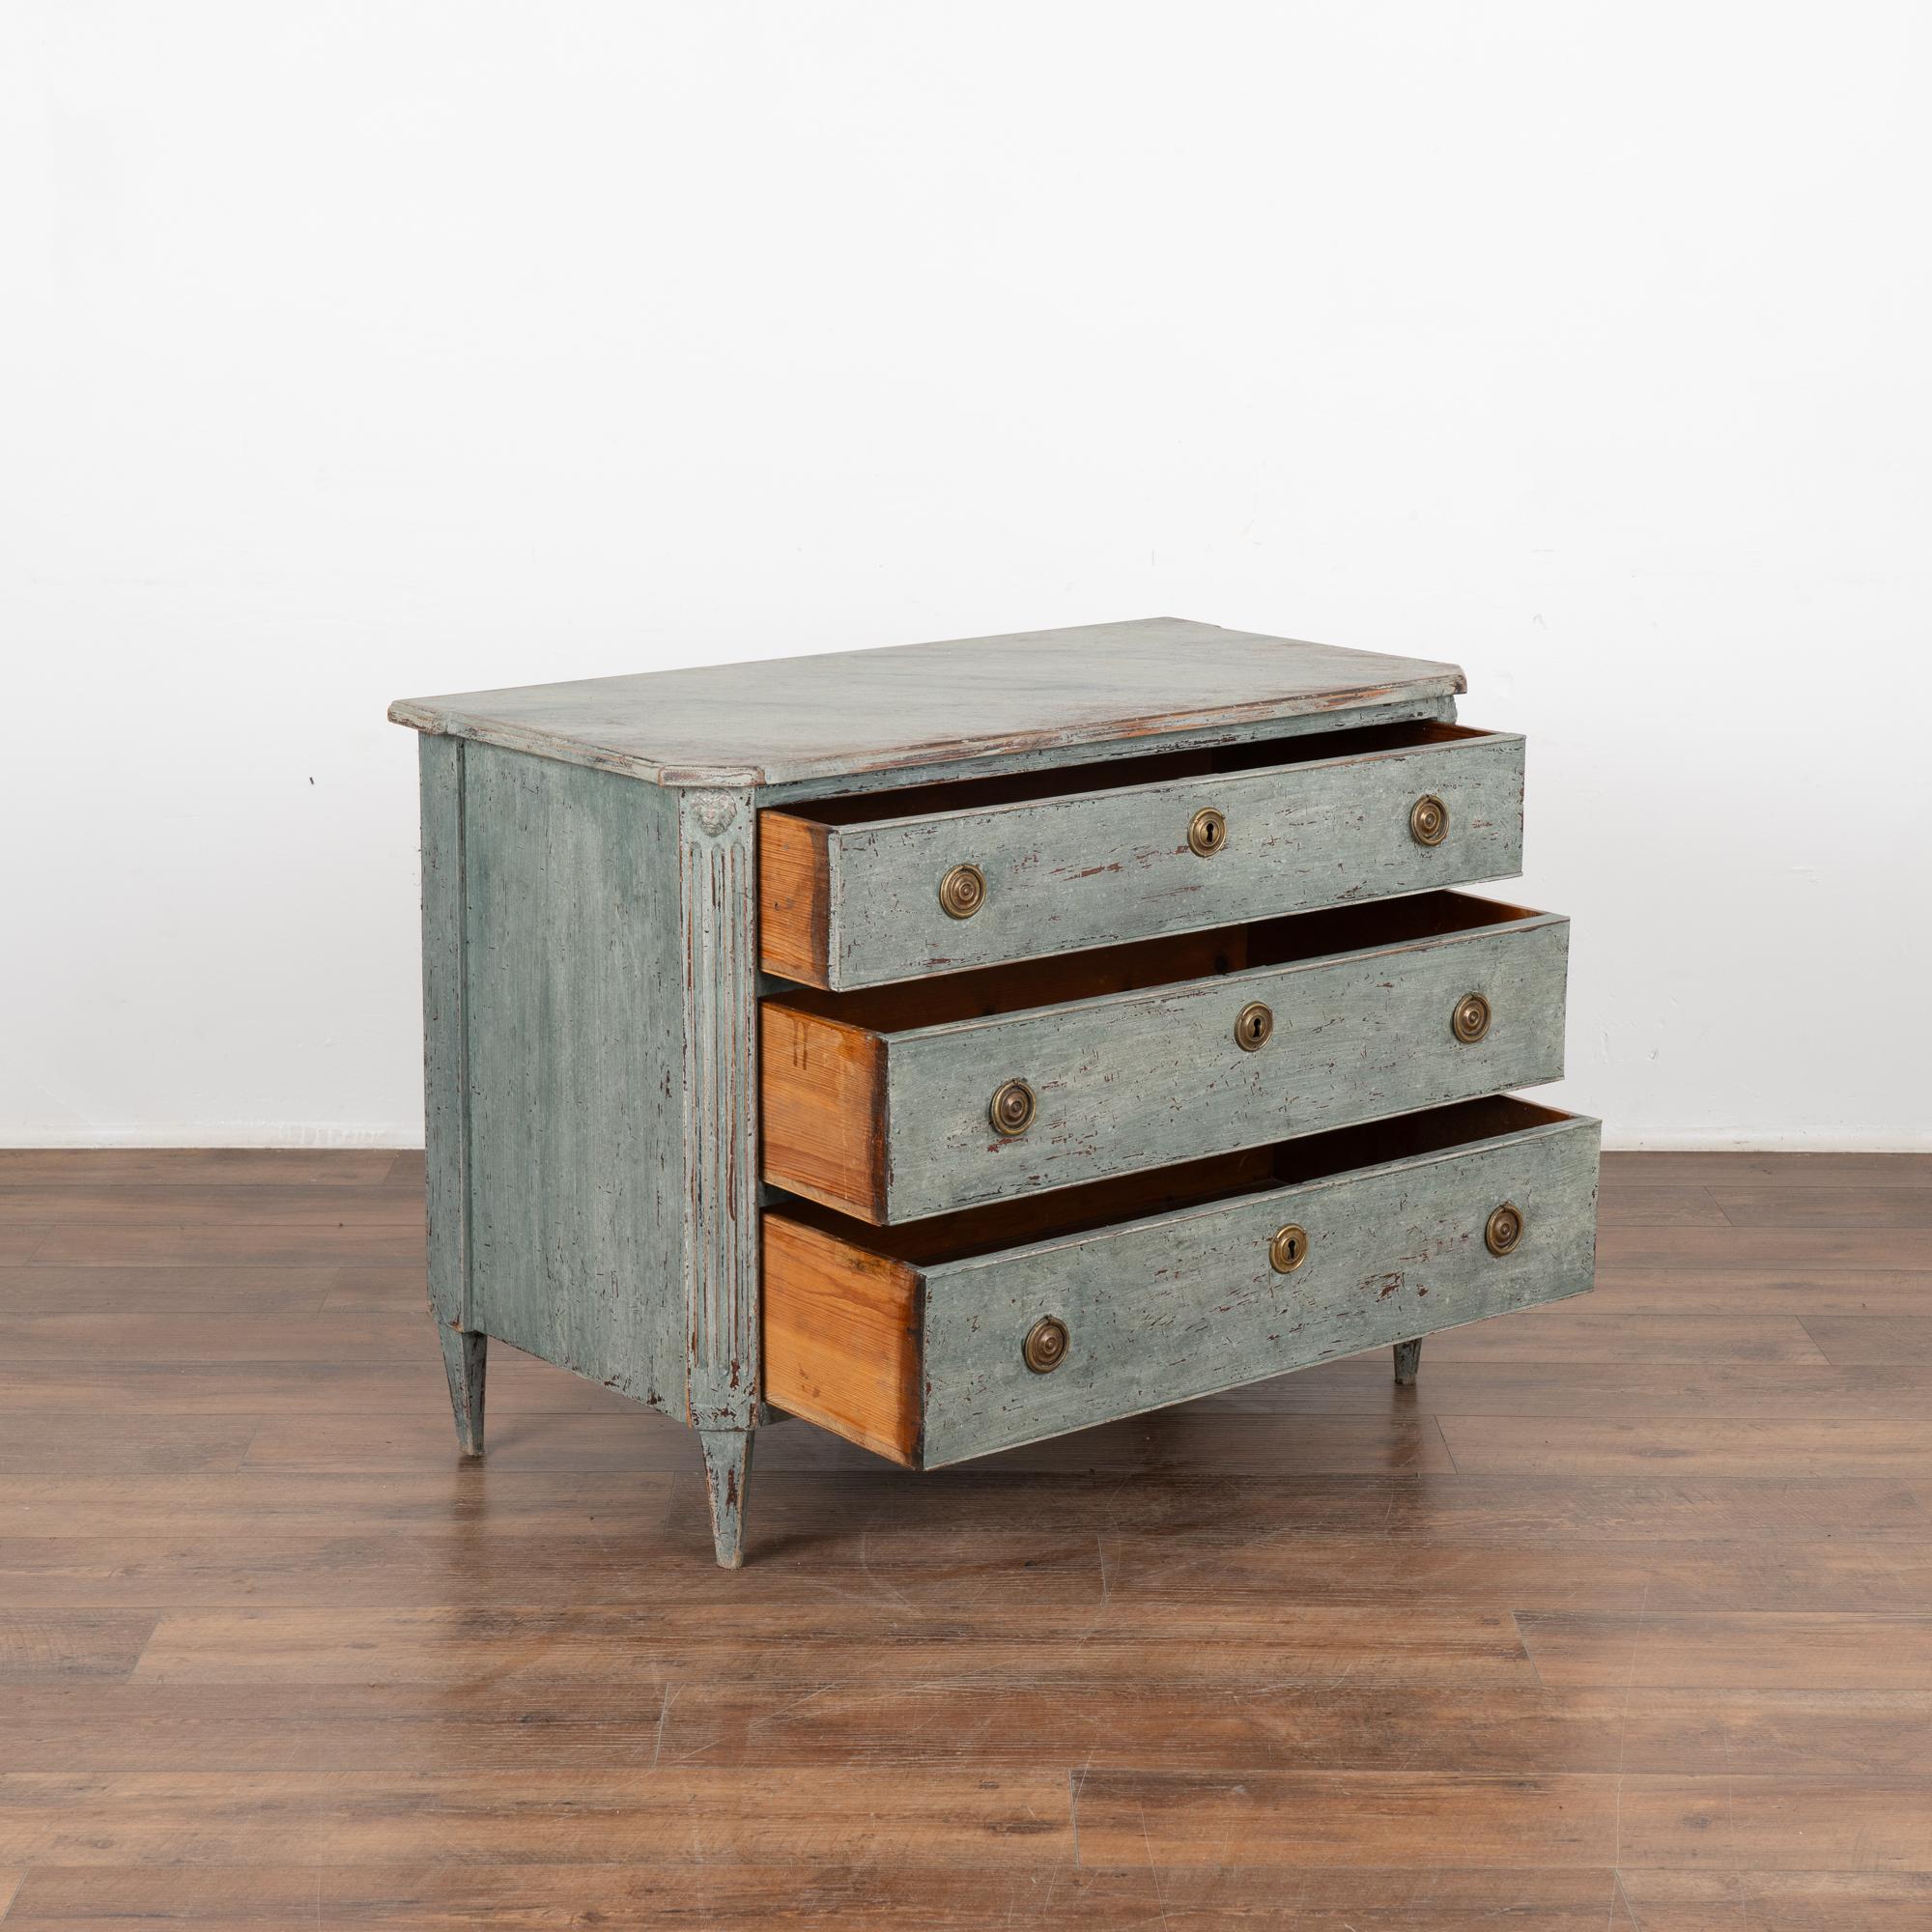 Country Blue Painted Chest of Three Drawers, Sweden circa 1820-40